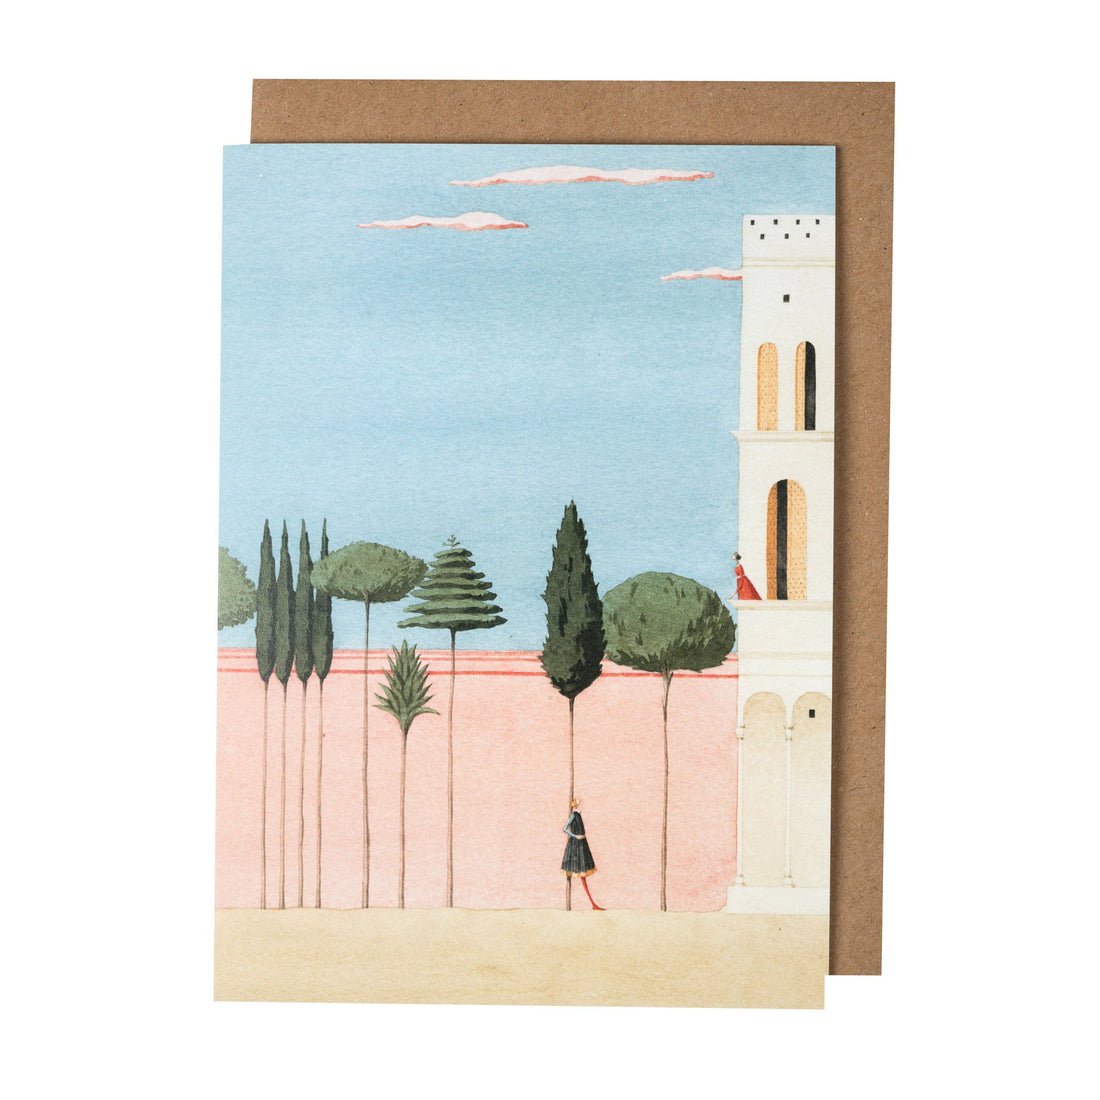 An environmentally sustainable Romeo &amp; Juliet Greeting Card with an illustration of a tower and trees by Hester &amp; Cook.